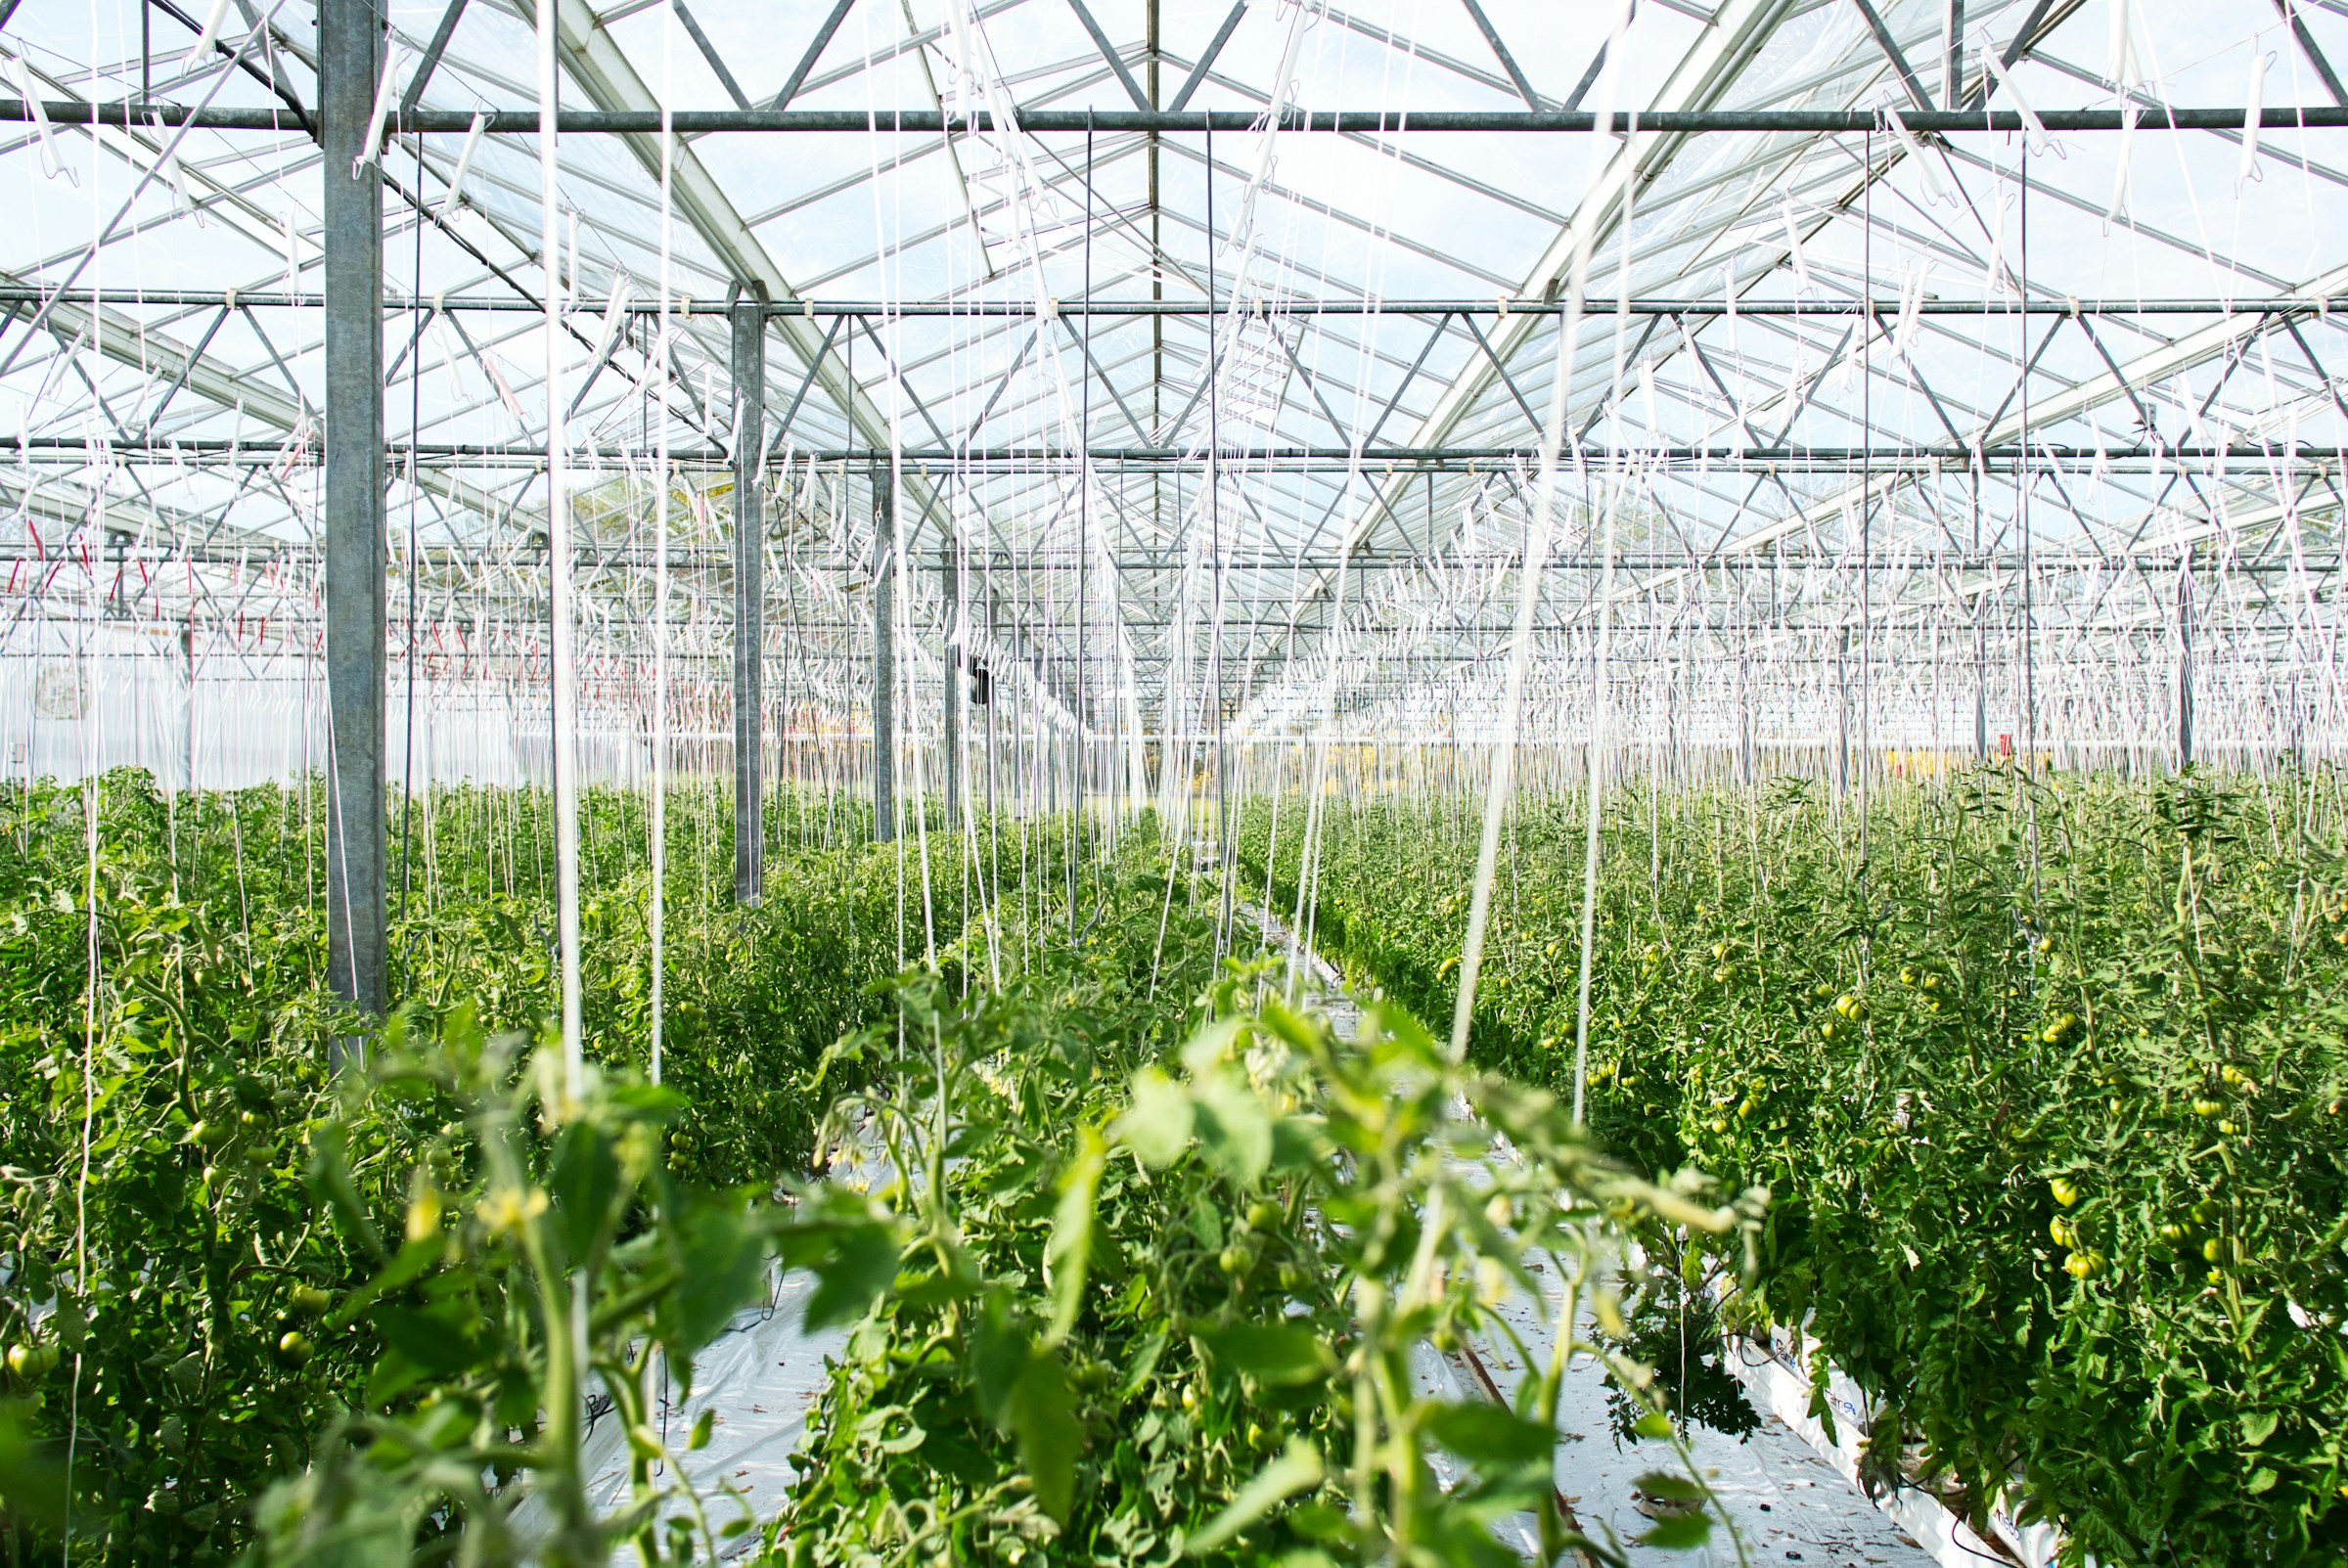 A greenhouse with tomatoes growing in it, using fertigation systems for optimal growth.